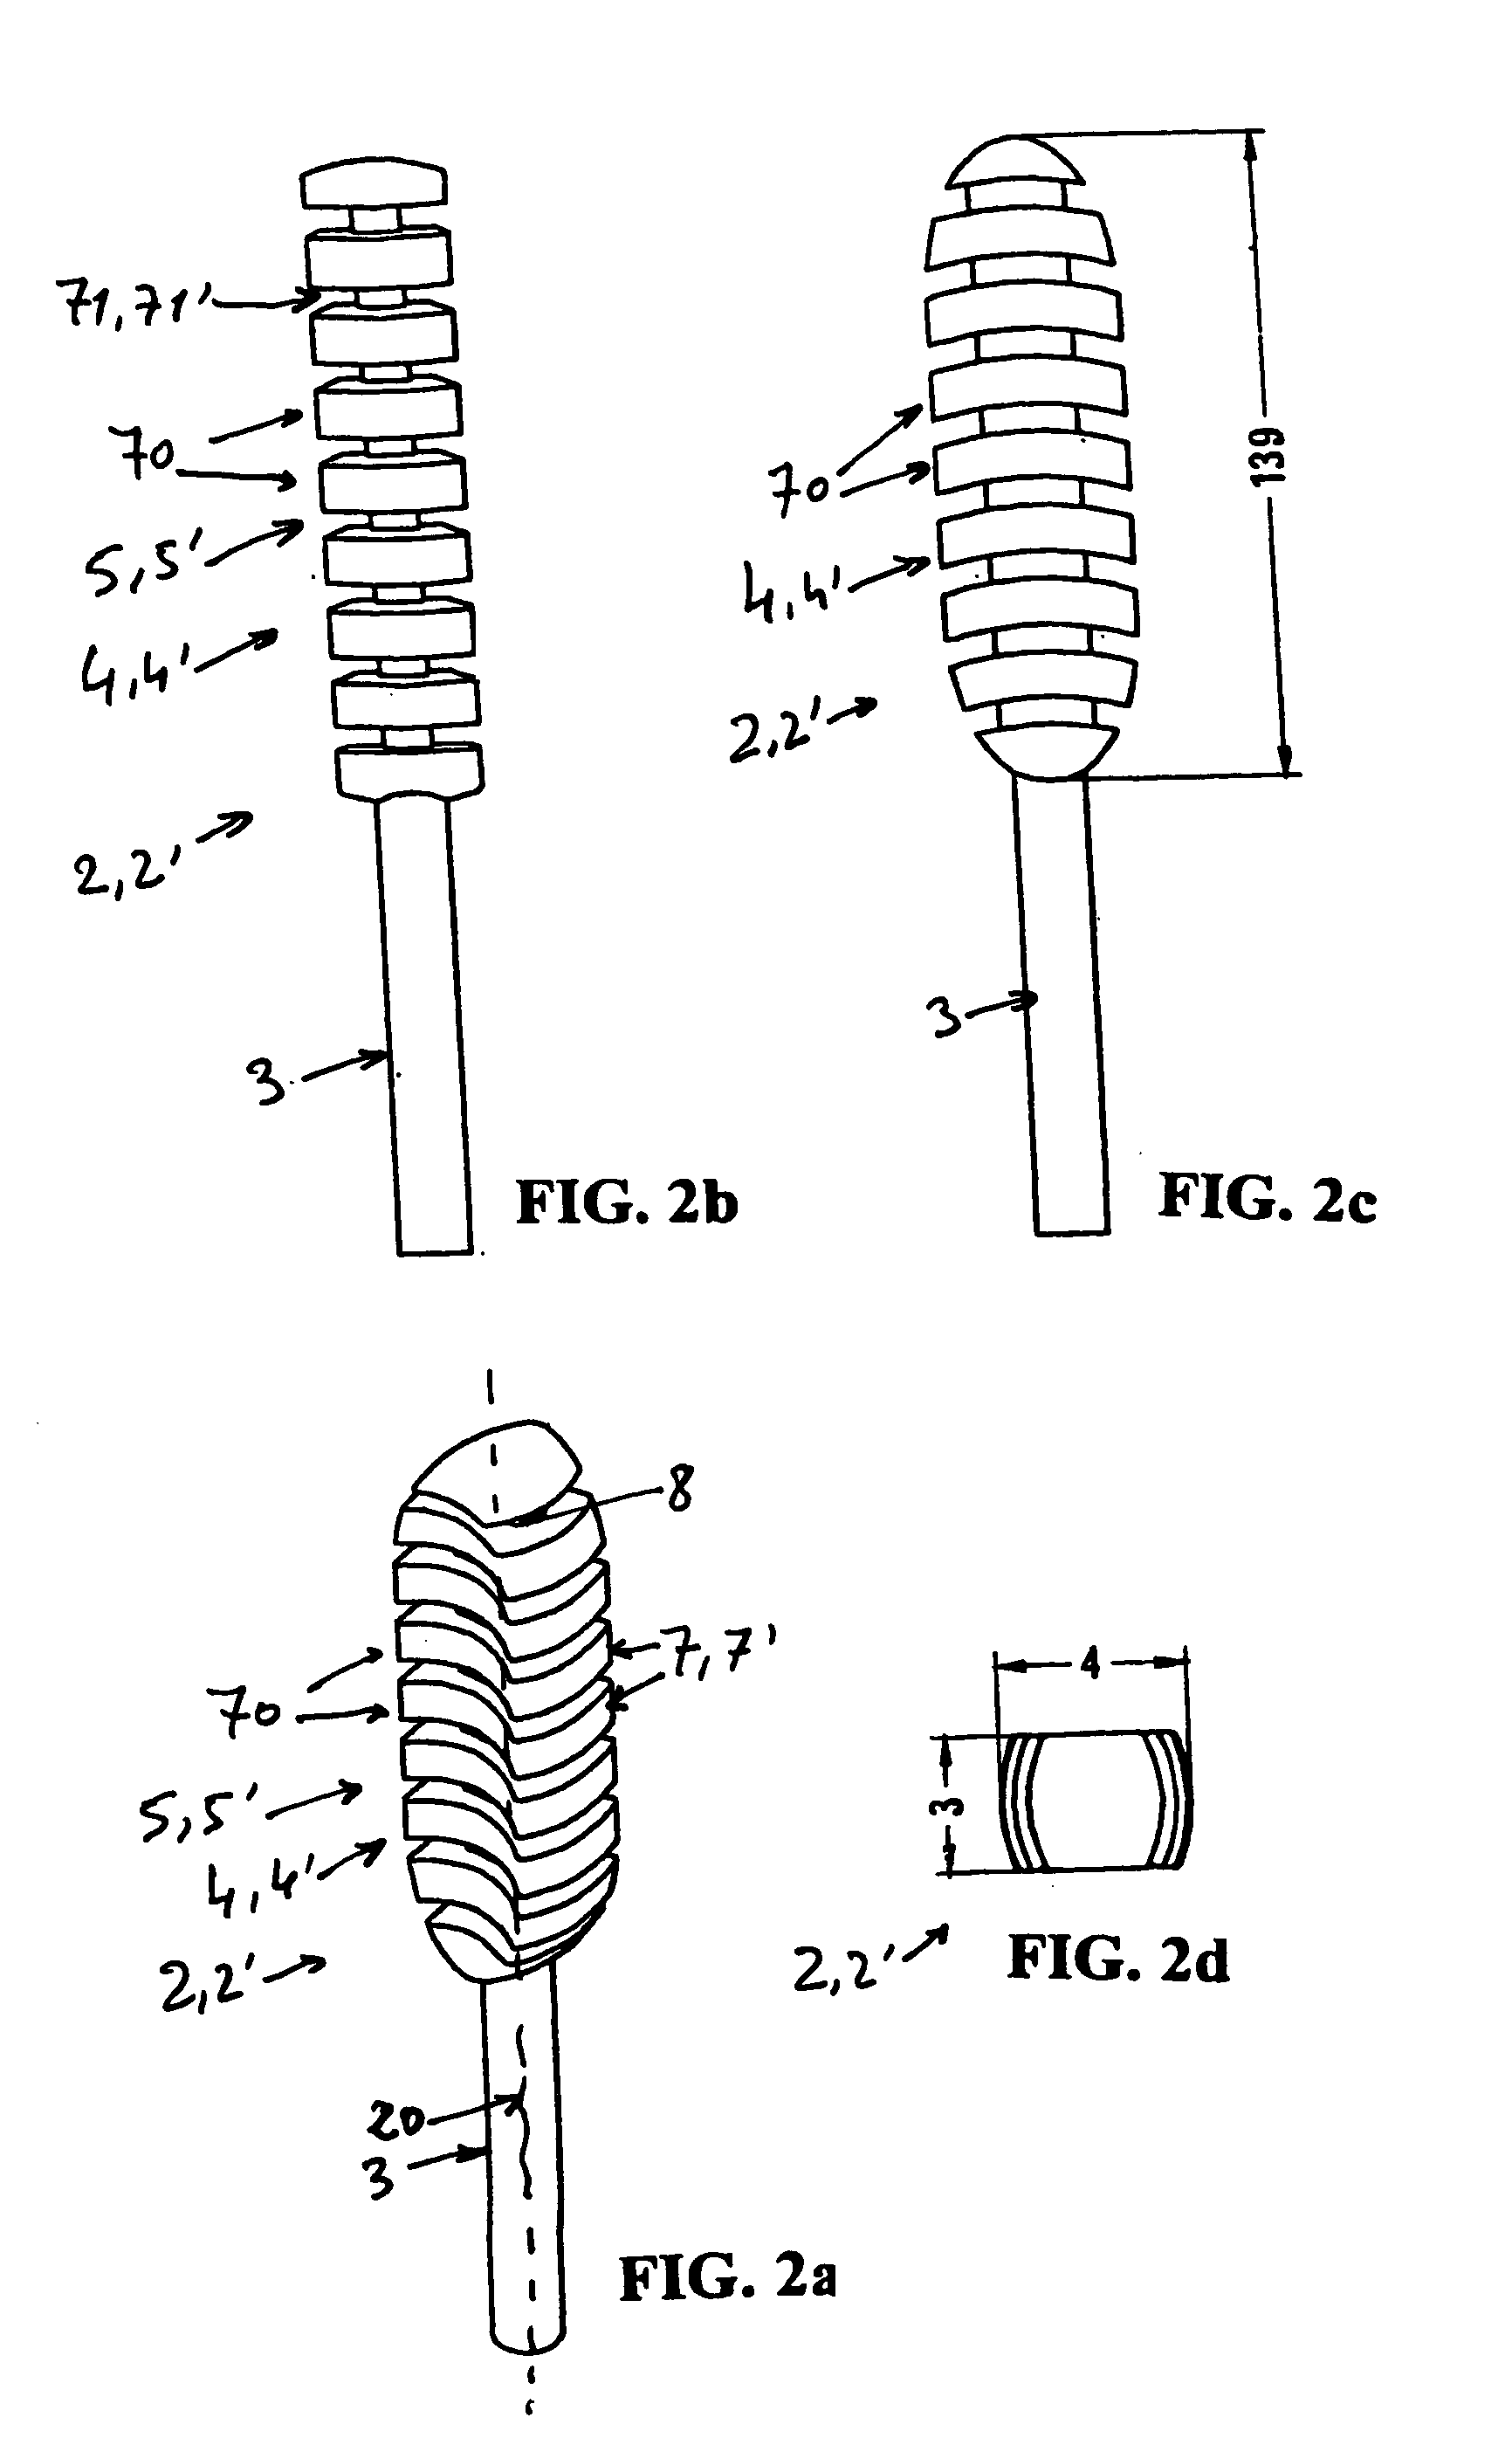 Applicator device for paste products, typically cosmetics